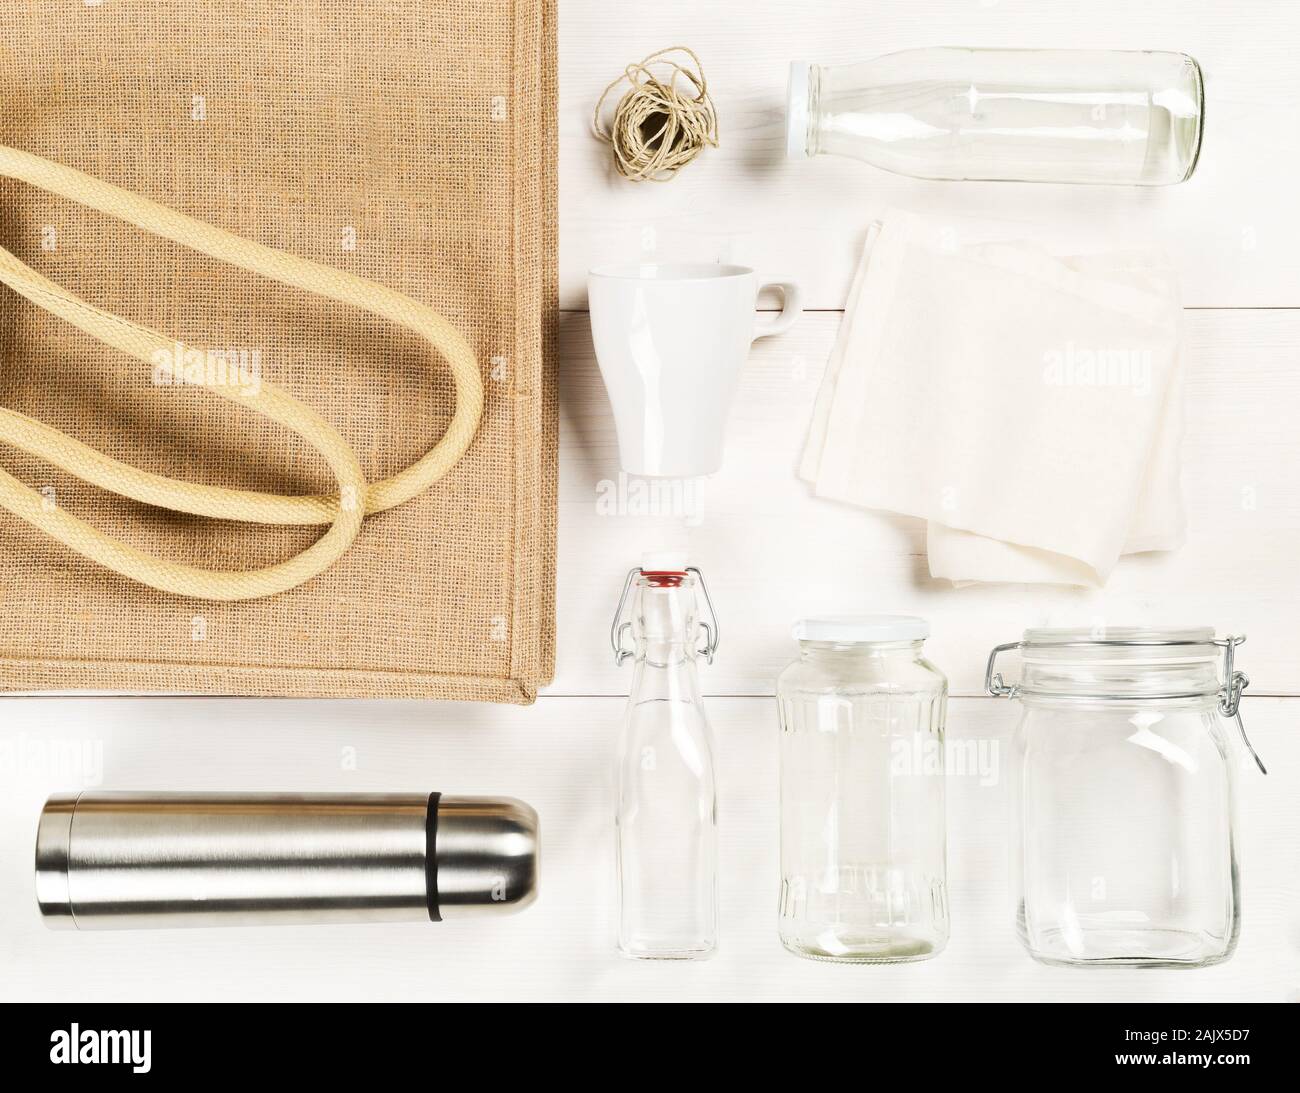 Zero waste or waste free shopping utensils with burlap bag, glass bottles and cotton bag on white wooden table background flat lay from above - waste Stock Photo